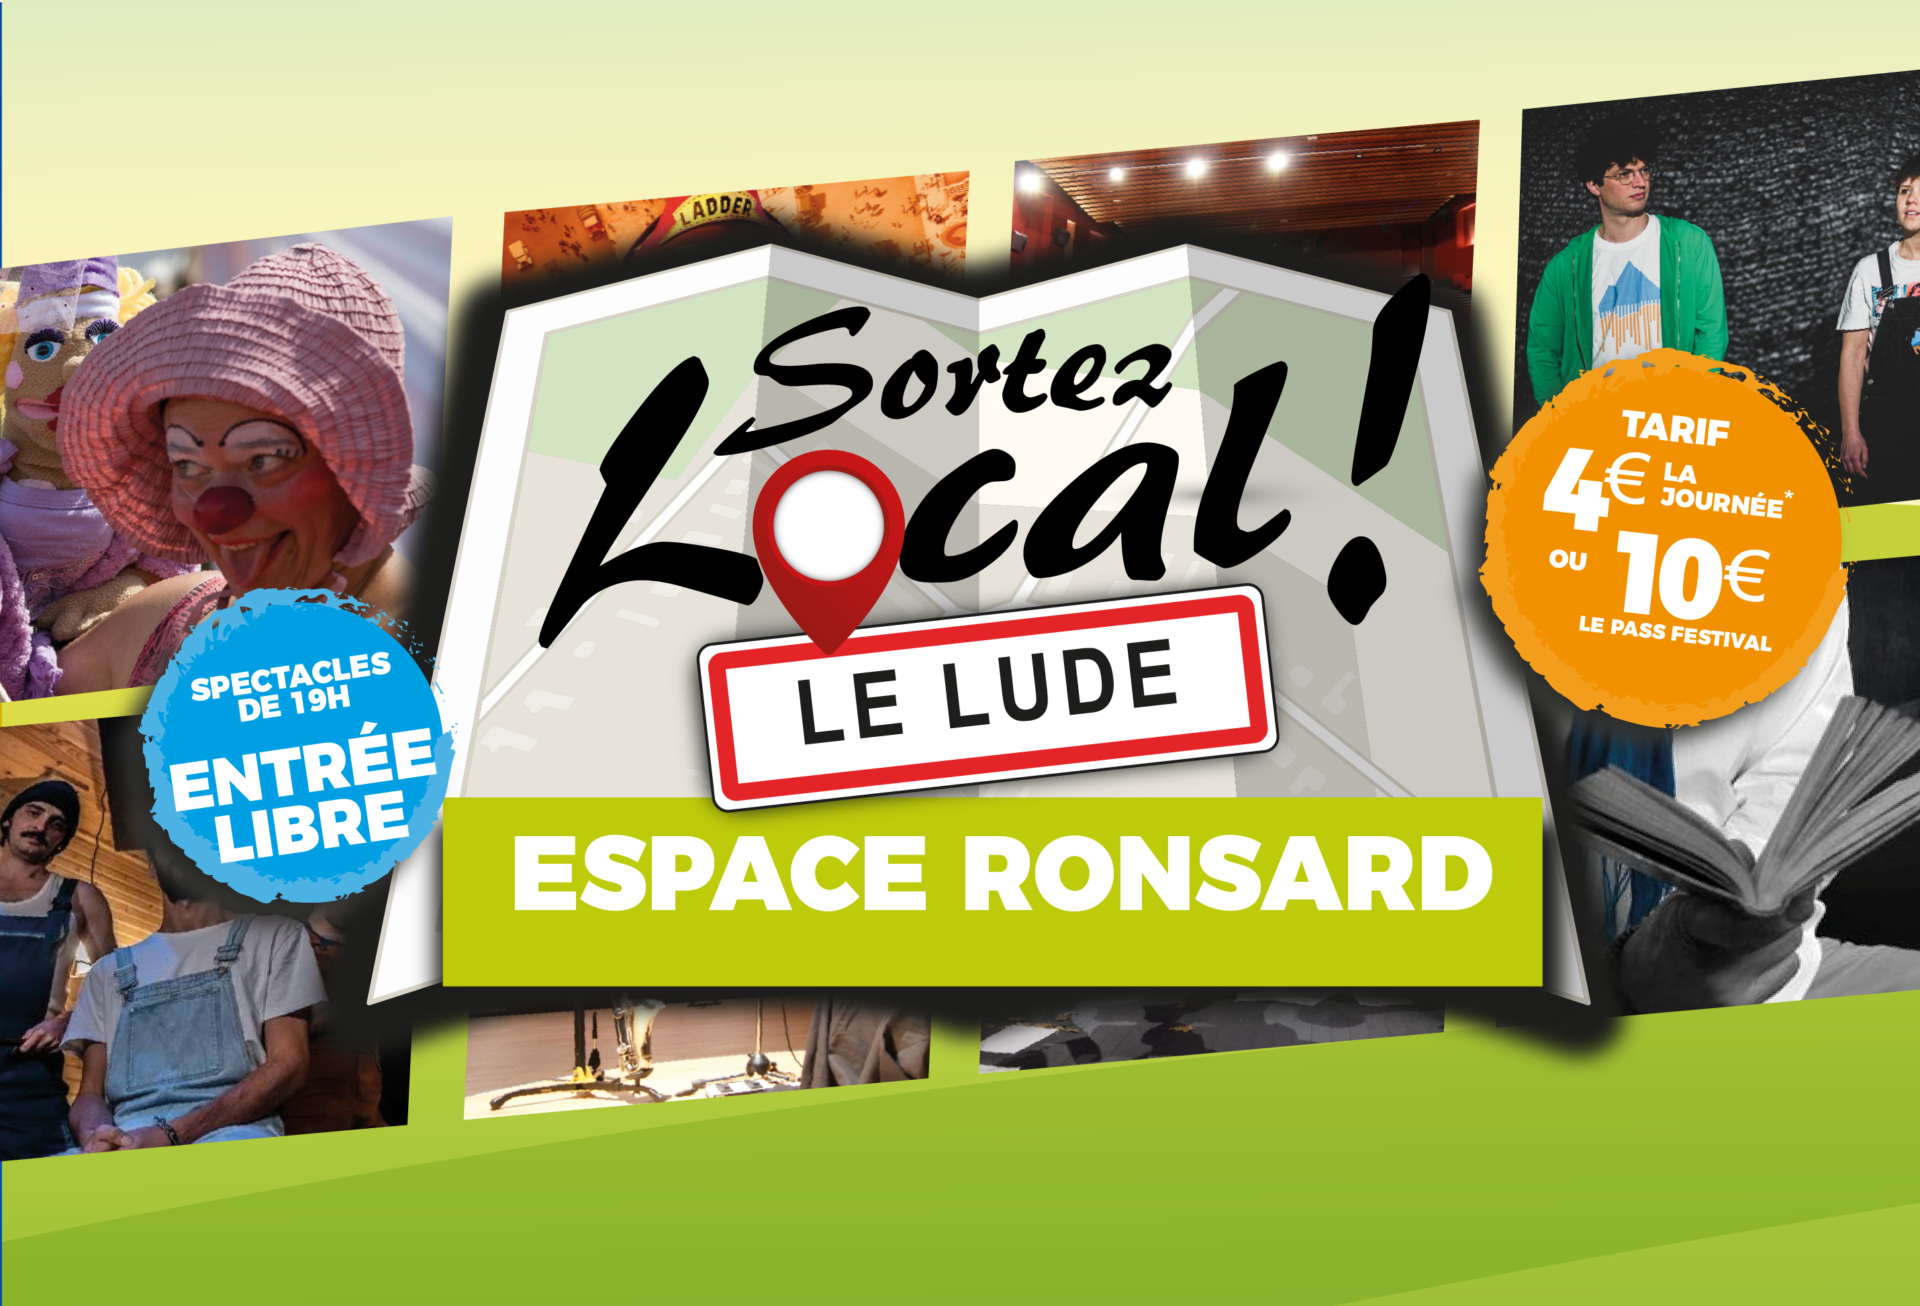 You are currently viewing Festival “Sortez Local” !